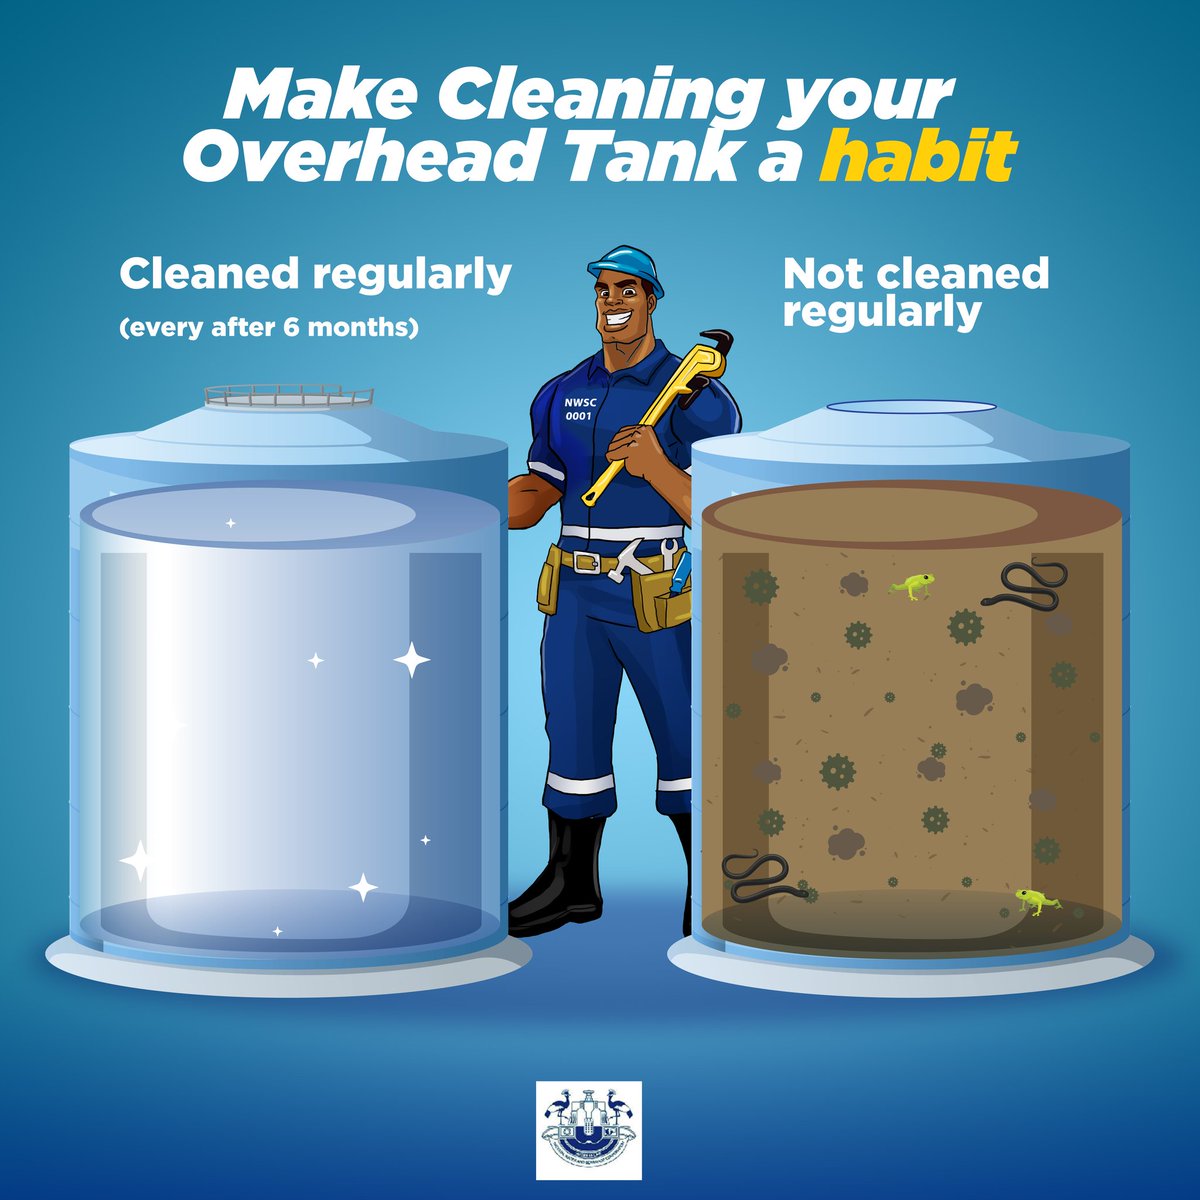 #NwscTips
When did you last clean your water tank?

Dear customers, don't compromise water quality at home.

Drain and clean storage tanks by scrubbing with a mild disinfectant at least once in 6 months. 
#waterman #NwscTips @NWSCMD